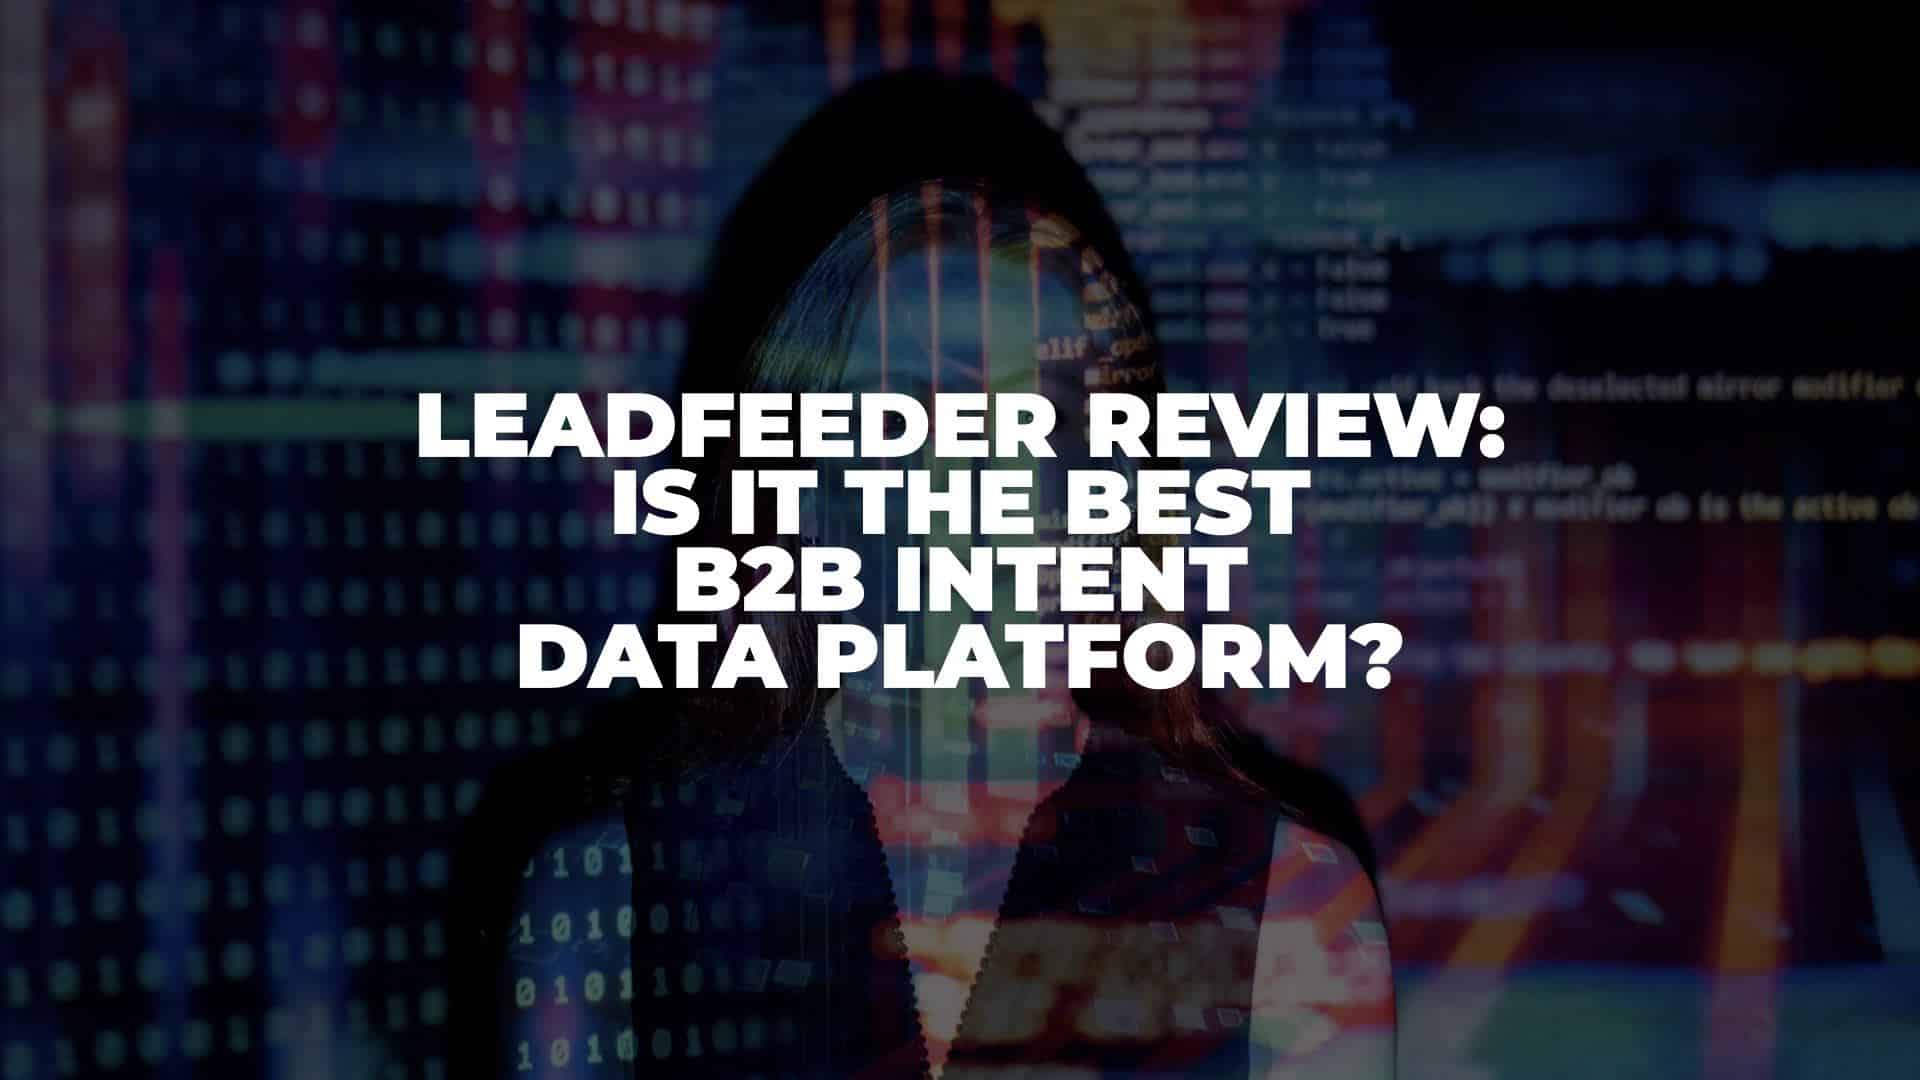 Leadfeeder Review - Featured Image